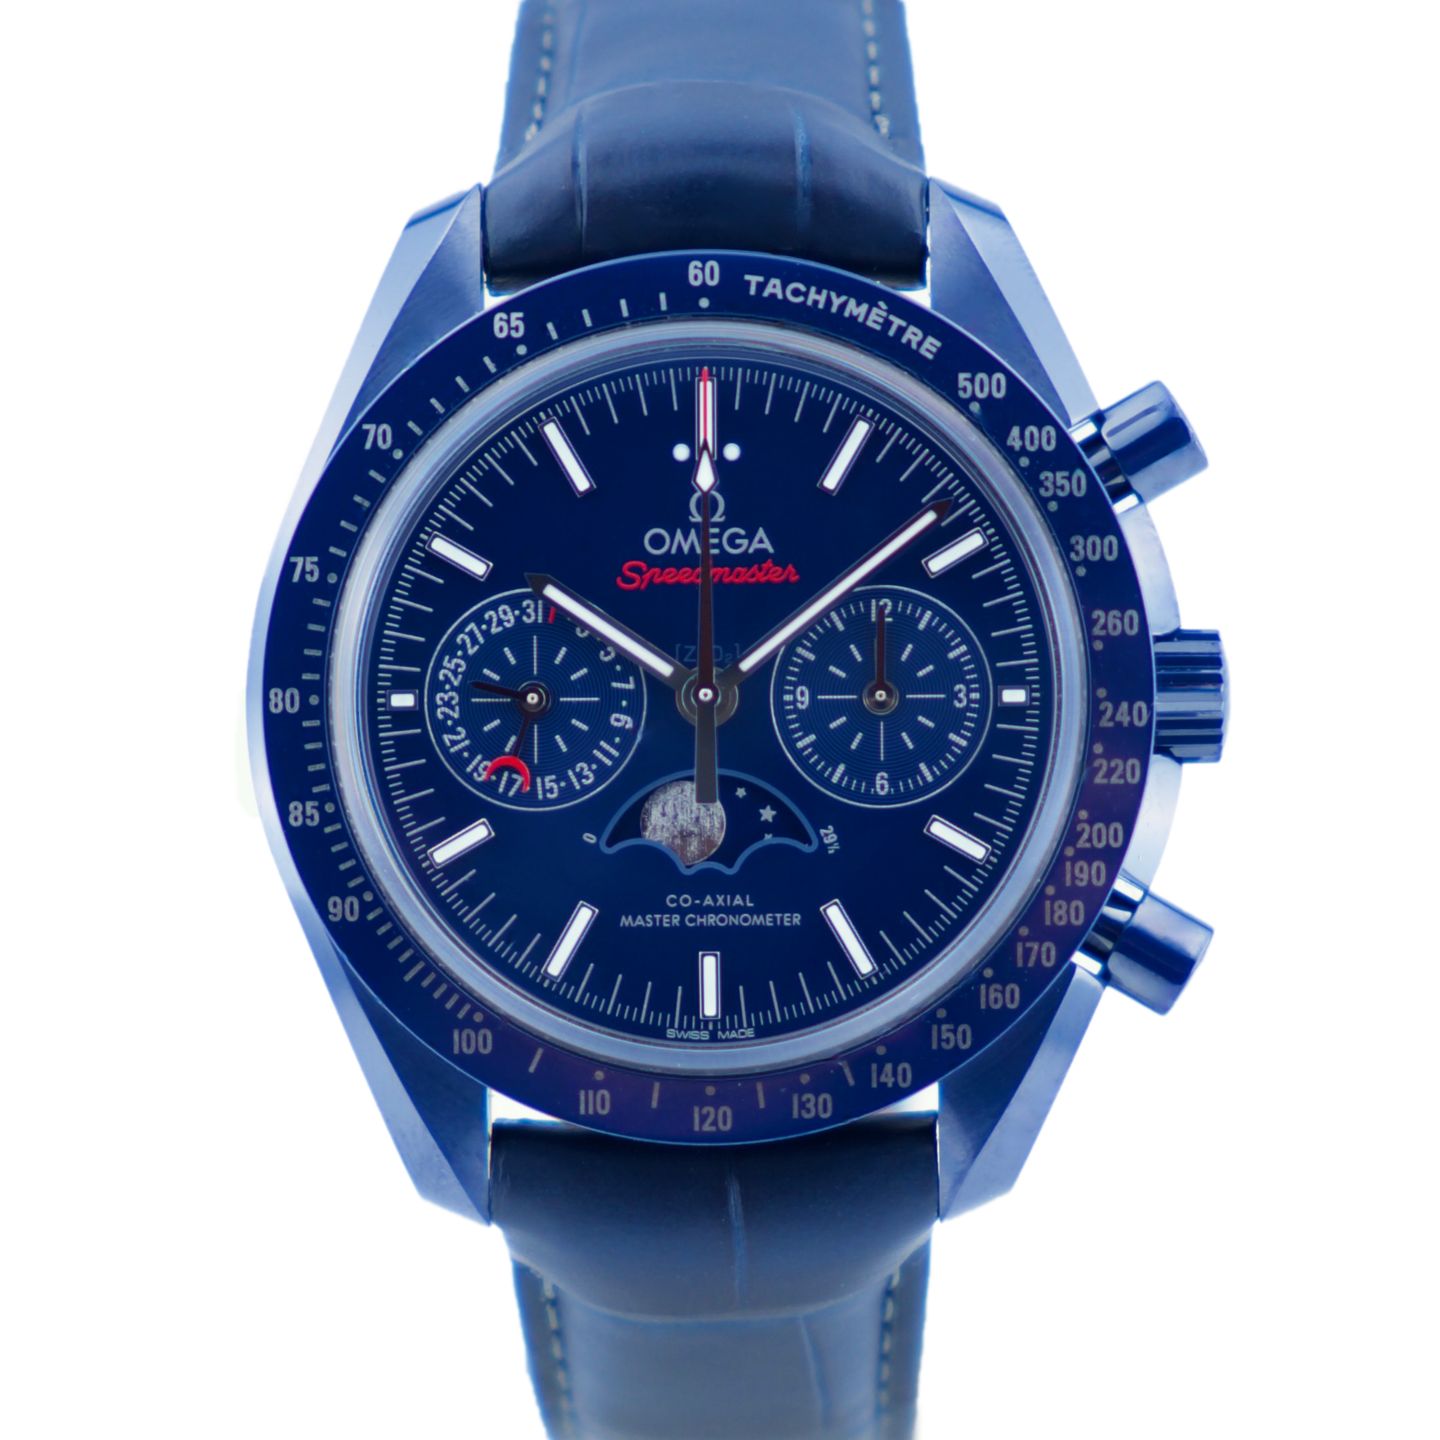 Omega Speedmaster Professional Moonwatch Moonphase 304.93.44.52.03.001 (2020) - Blue dial 44 mm Ceramic case (1/1)